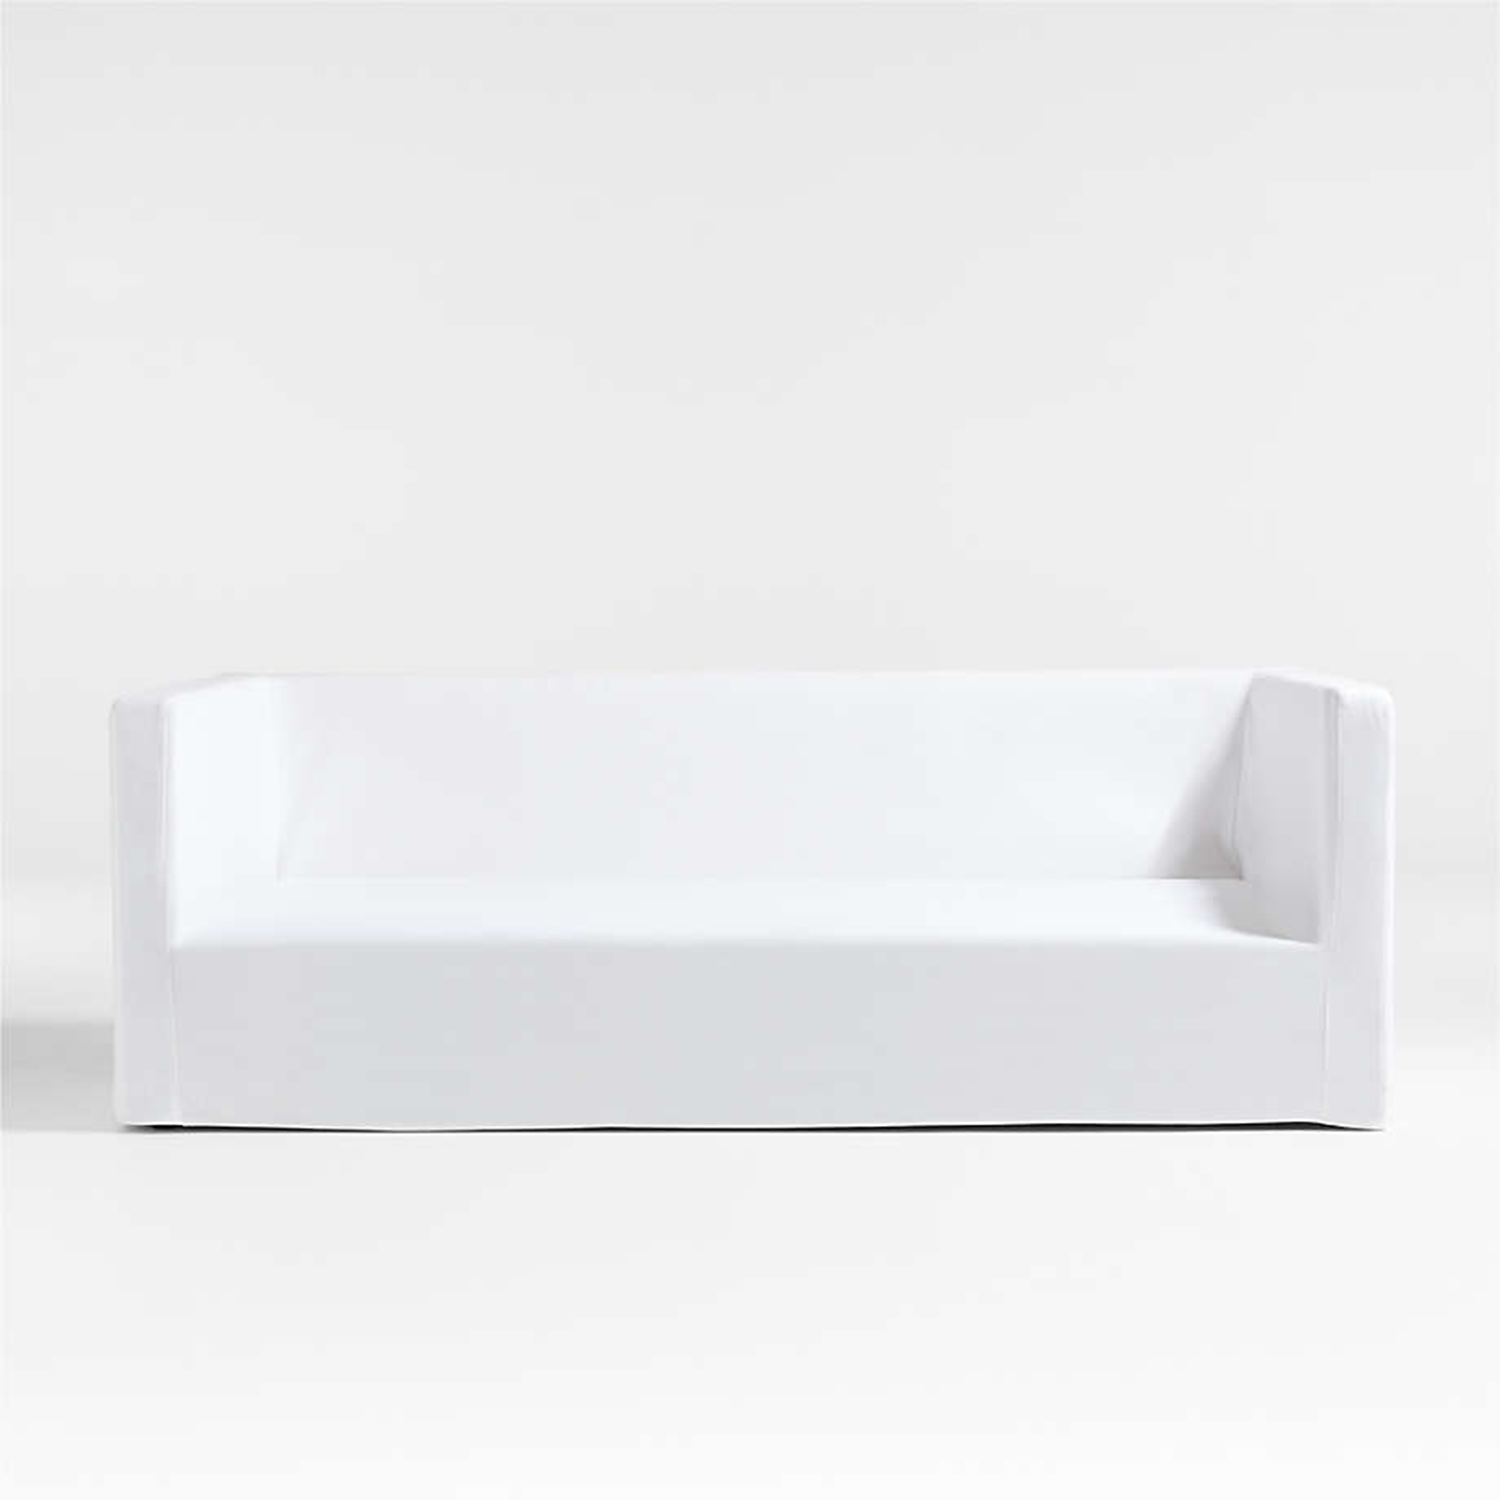 White slipcovered daybed frame from Crate&Barrel